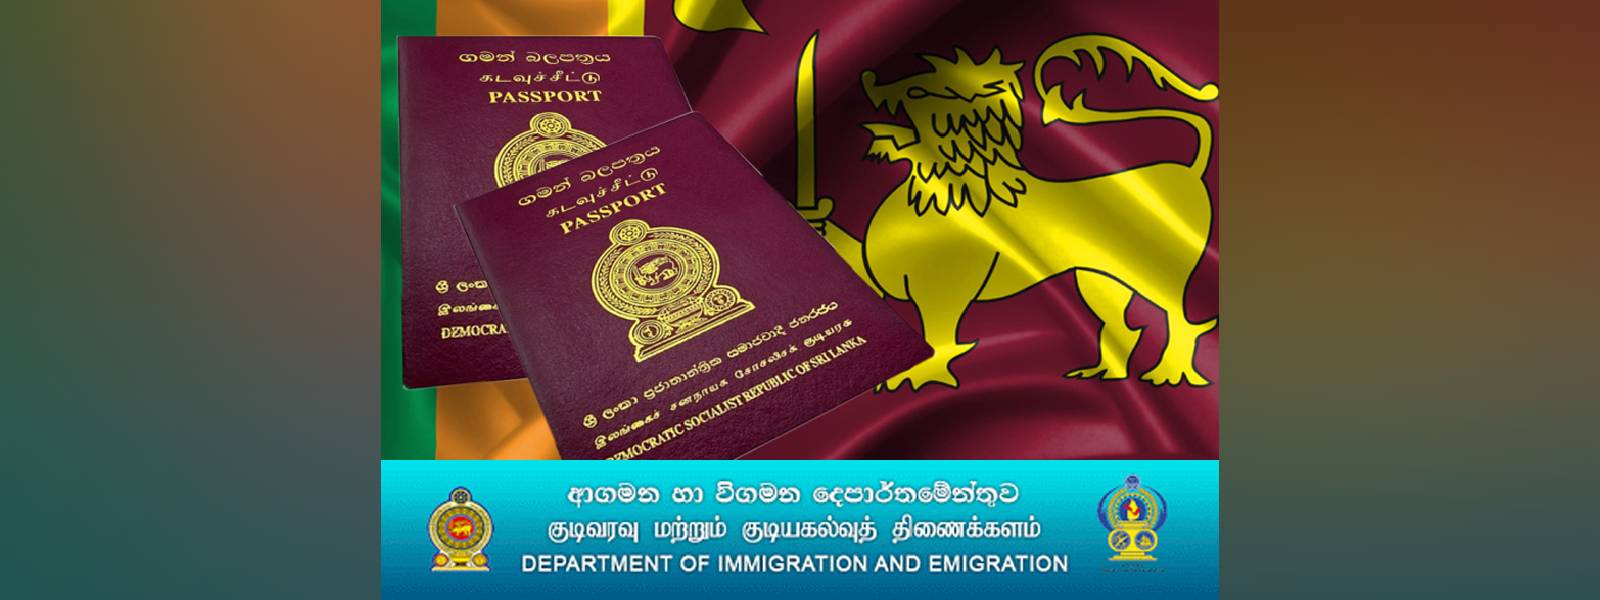 Rate of passports obtained daily on the rise